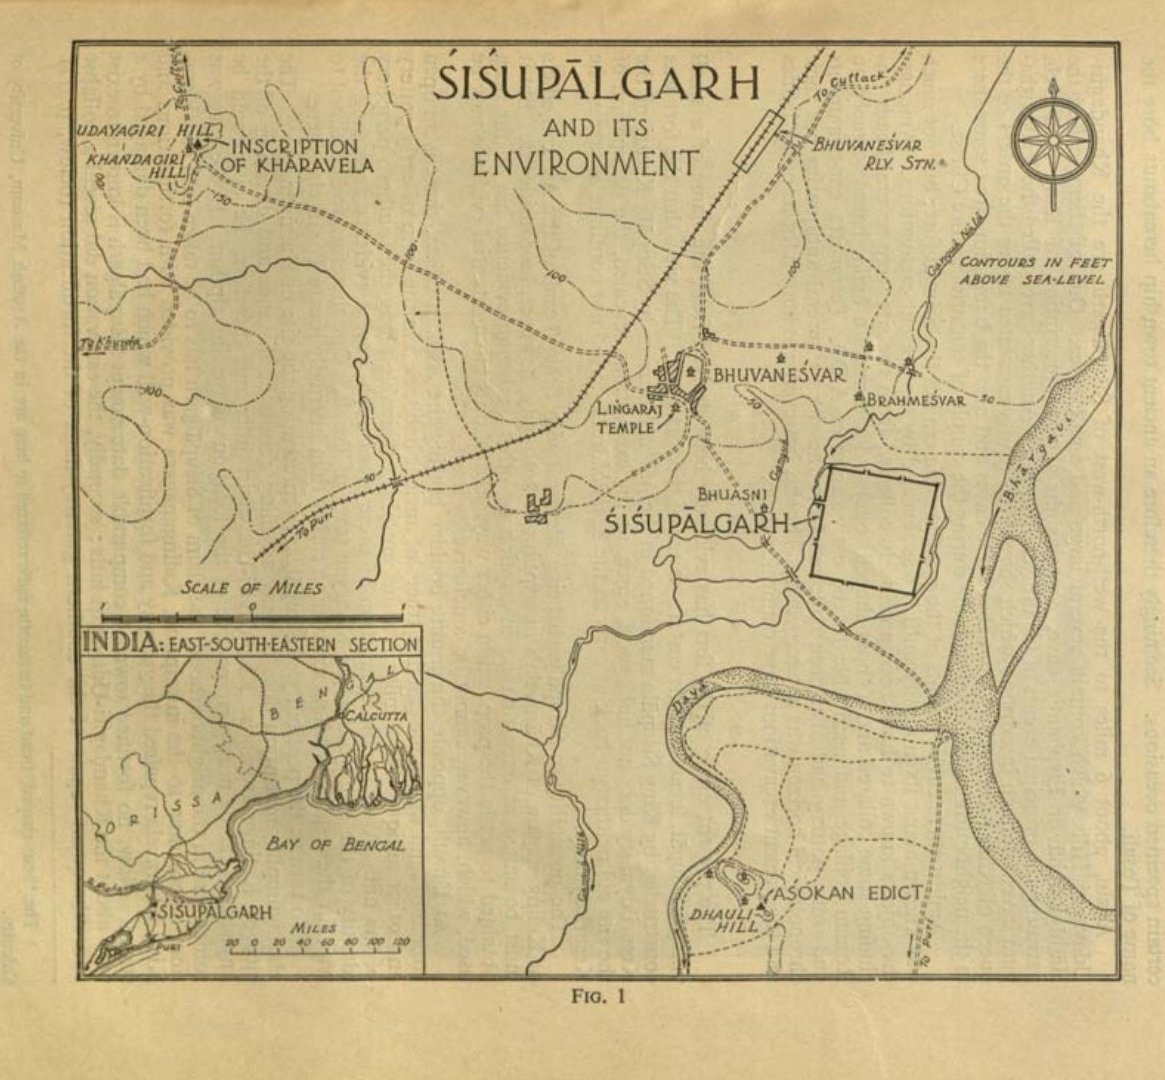 Mr. B.B.Lal was the famous archaeologist who came to Odisha, did a survey and start excavation at the famous Sisupalgarh. Sisupalgarh was a city which flourished from 6th century BC to 5th century AD. Some antique and rare photos of the first excavation in the below thread.